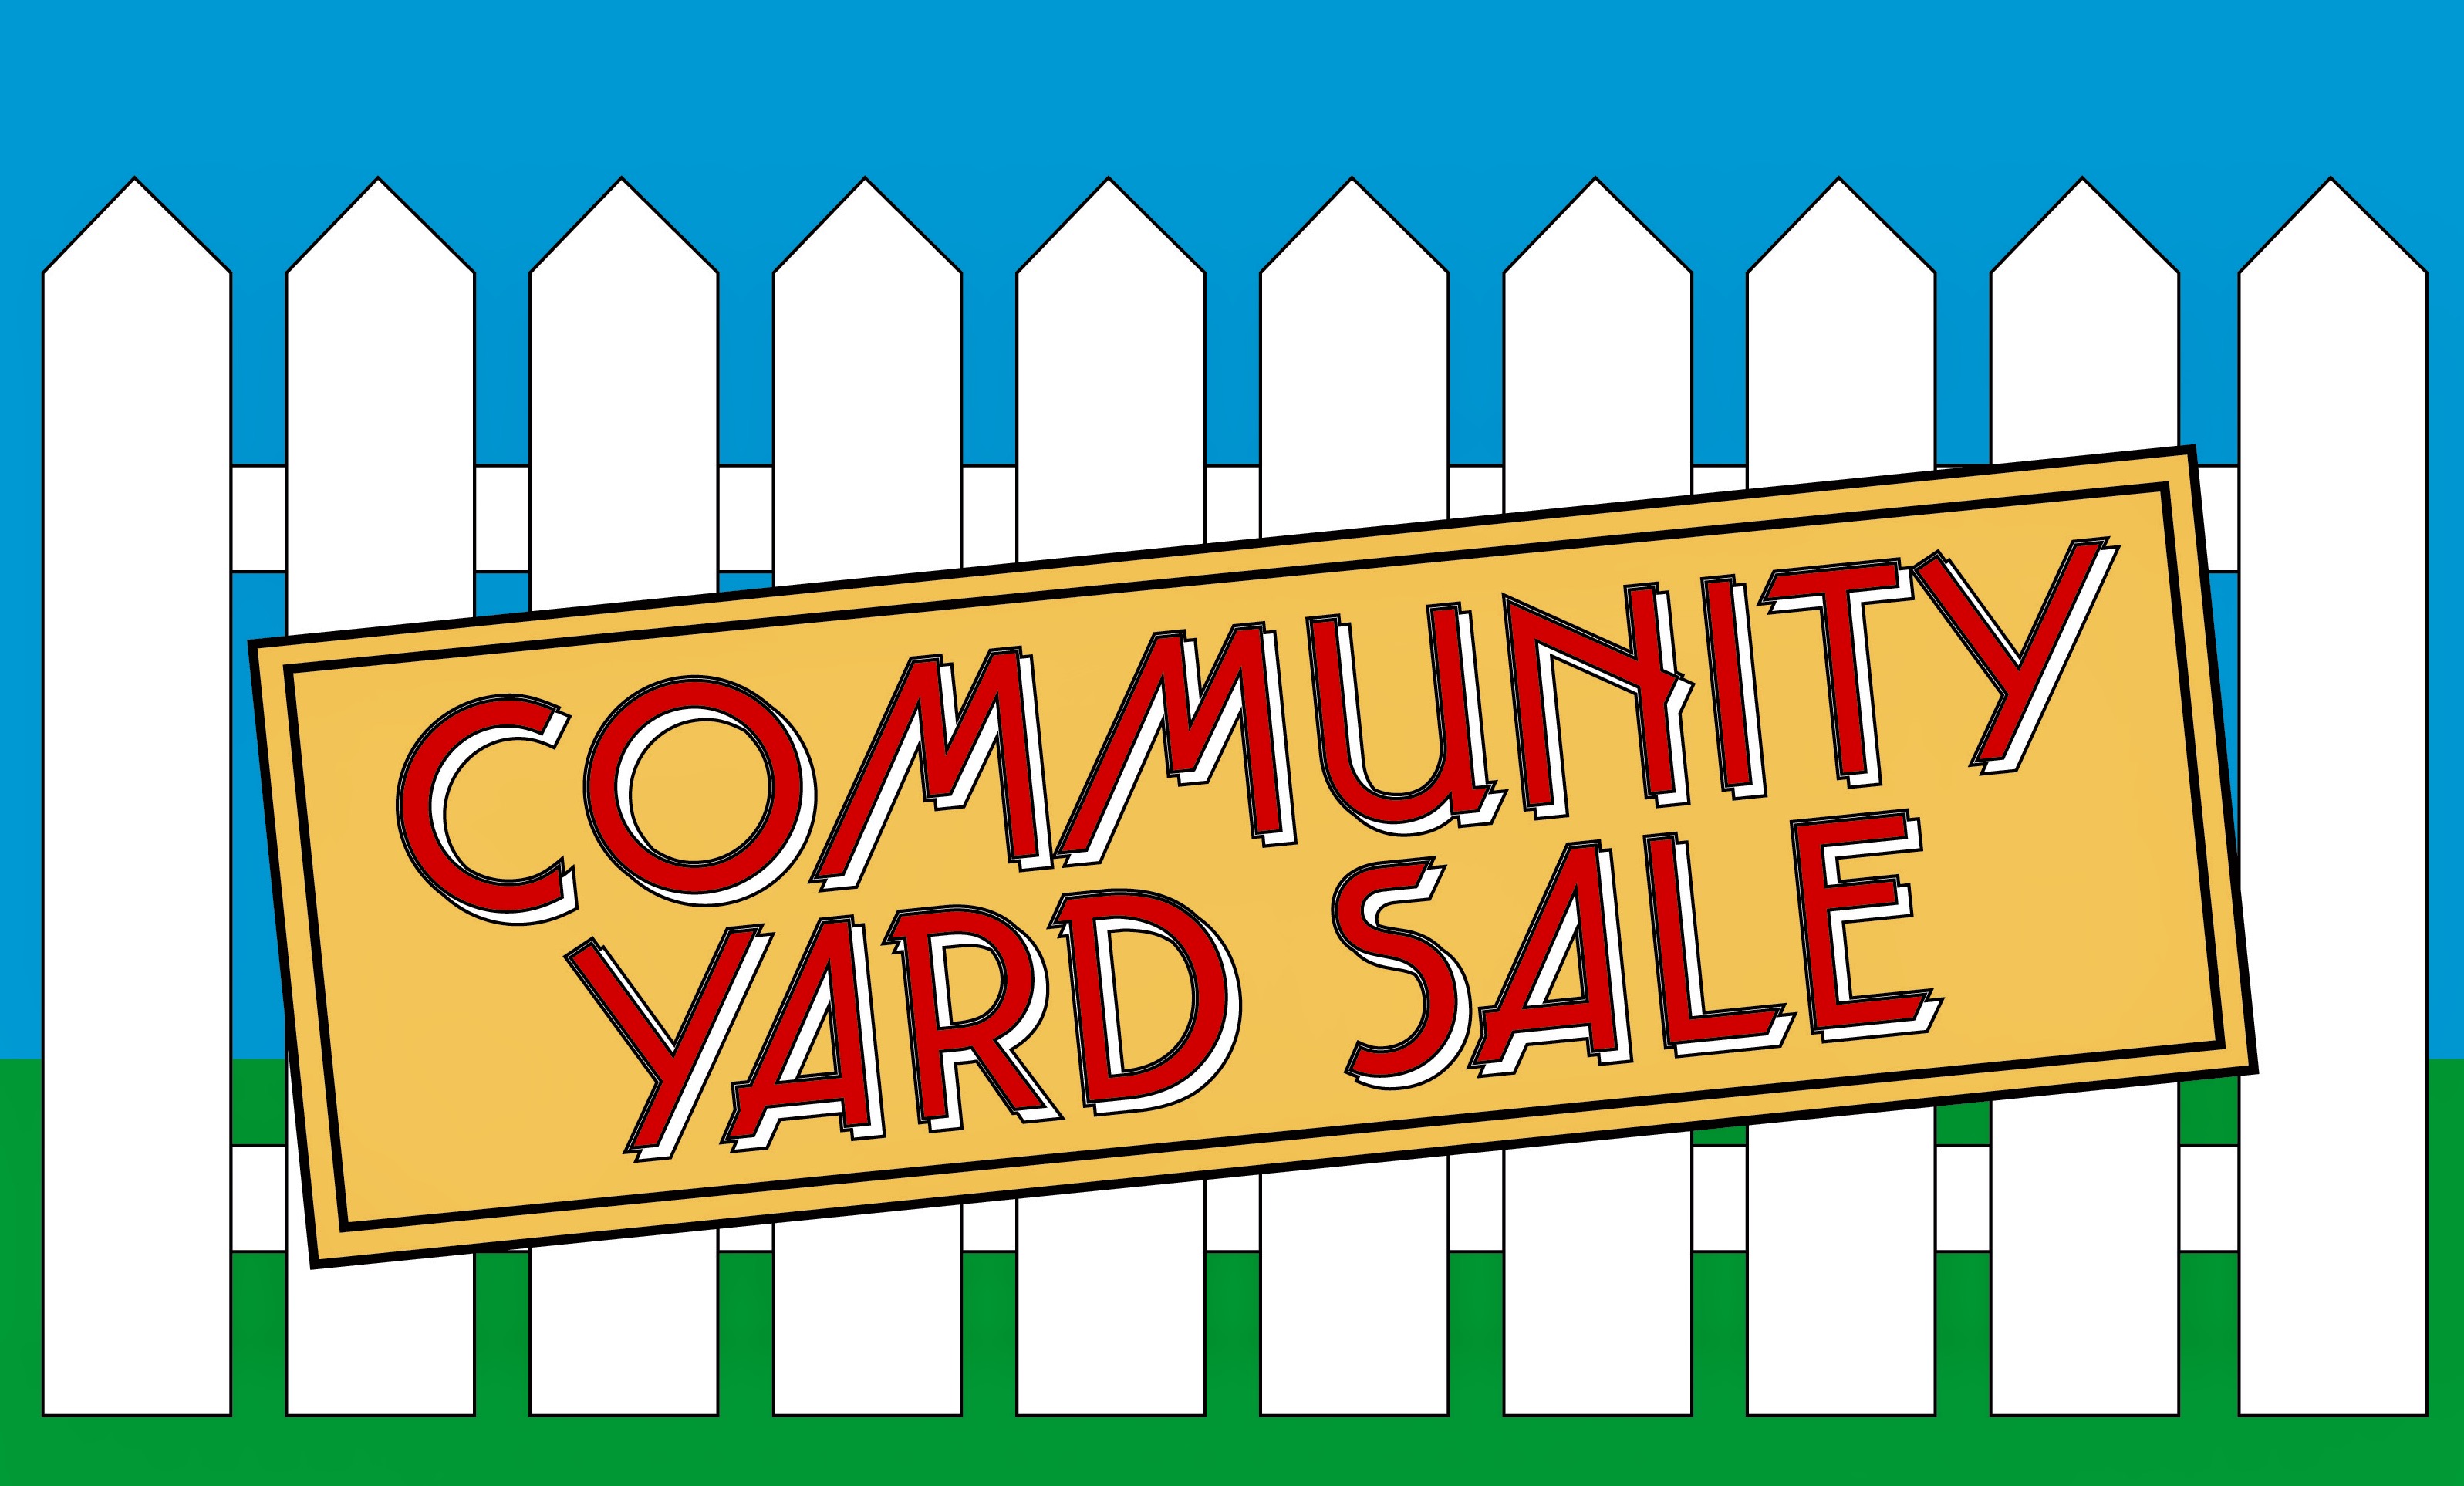 Yard Sale Clipart Community Wide and other clipart images on Cliparts pub ™...